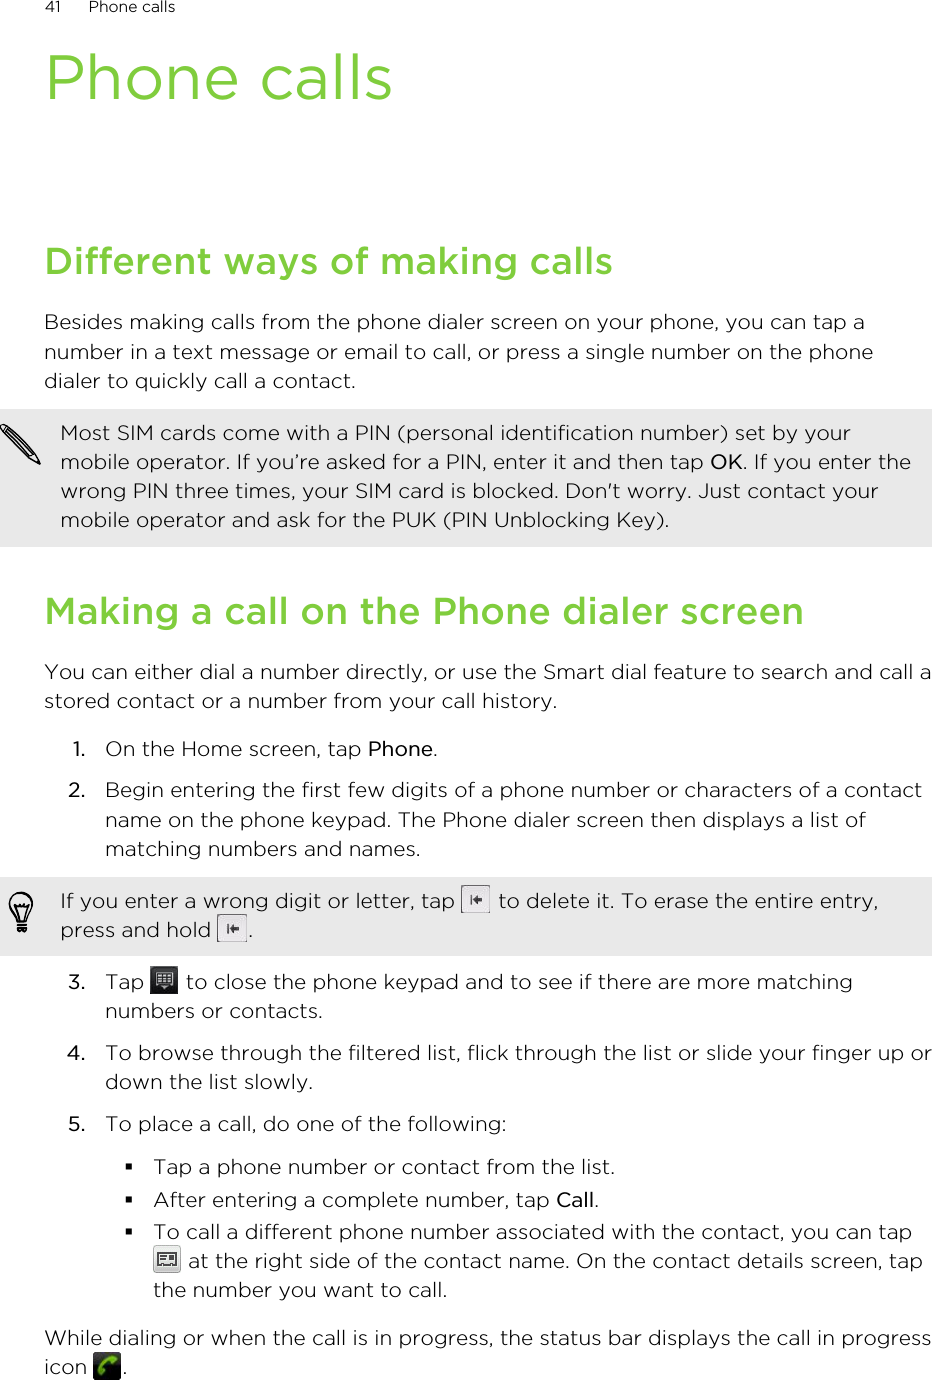 Phone callsDifferent ways of making callsBesides making calls from the phone dialer screen on your phone, you can tap anumber in a text message or email to call, or press a single number on the phonedialer to quickly call a contact.Most SIM cards come with a PIN (personal identification number) set by yourmobile operator. If you’re asked for a PIN, enter it and then tap OK. If you enter thewrong PIN three times, your SIM card is blocked. Don&apos;t worry. Just contact yourmobile operator and ask for the PUK (PIN Unblocking Key).Making a call on the Phone dialer screenYou can either dial a number directly, or use the Smart dial feature to search and call astored contact or a number from your call history.1. On the Home screen, tap Phone.2. Begin entering the first few digits of a phone number or characters of a contactname on the phone keypad. The Phone dialer screen then displays a list ofmatching numbers and names.If you enter a wrong digit or letter, tap   to delete it. To erase the entire entry,press and hold  .3. Tap   to close the phone keypad and to see if there are more matchingnumbers or contacts.4. To browse through the filtered list, flick through the list or slide your finger up ordown the list slowly.5. To place a call, do one of the following:§Tap a phone number or contact from the list.§After entering a complete number, tap Call.§To call a different phone number associated with the contact, you can tap at the right side of the contact name. On the contact details screen, tapthe number you want to call.While dialing or when the call is in progress, the status bar displays the call in progressicon  .41 Phone calls